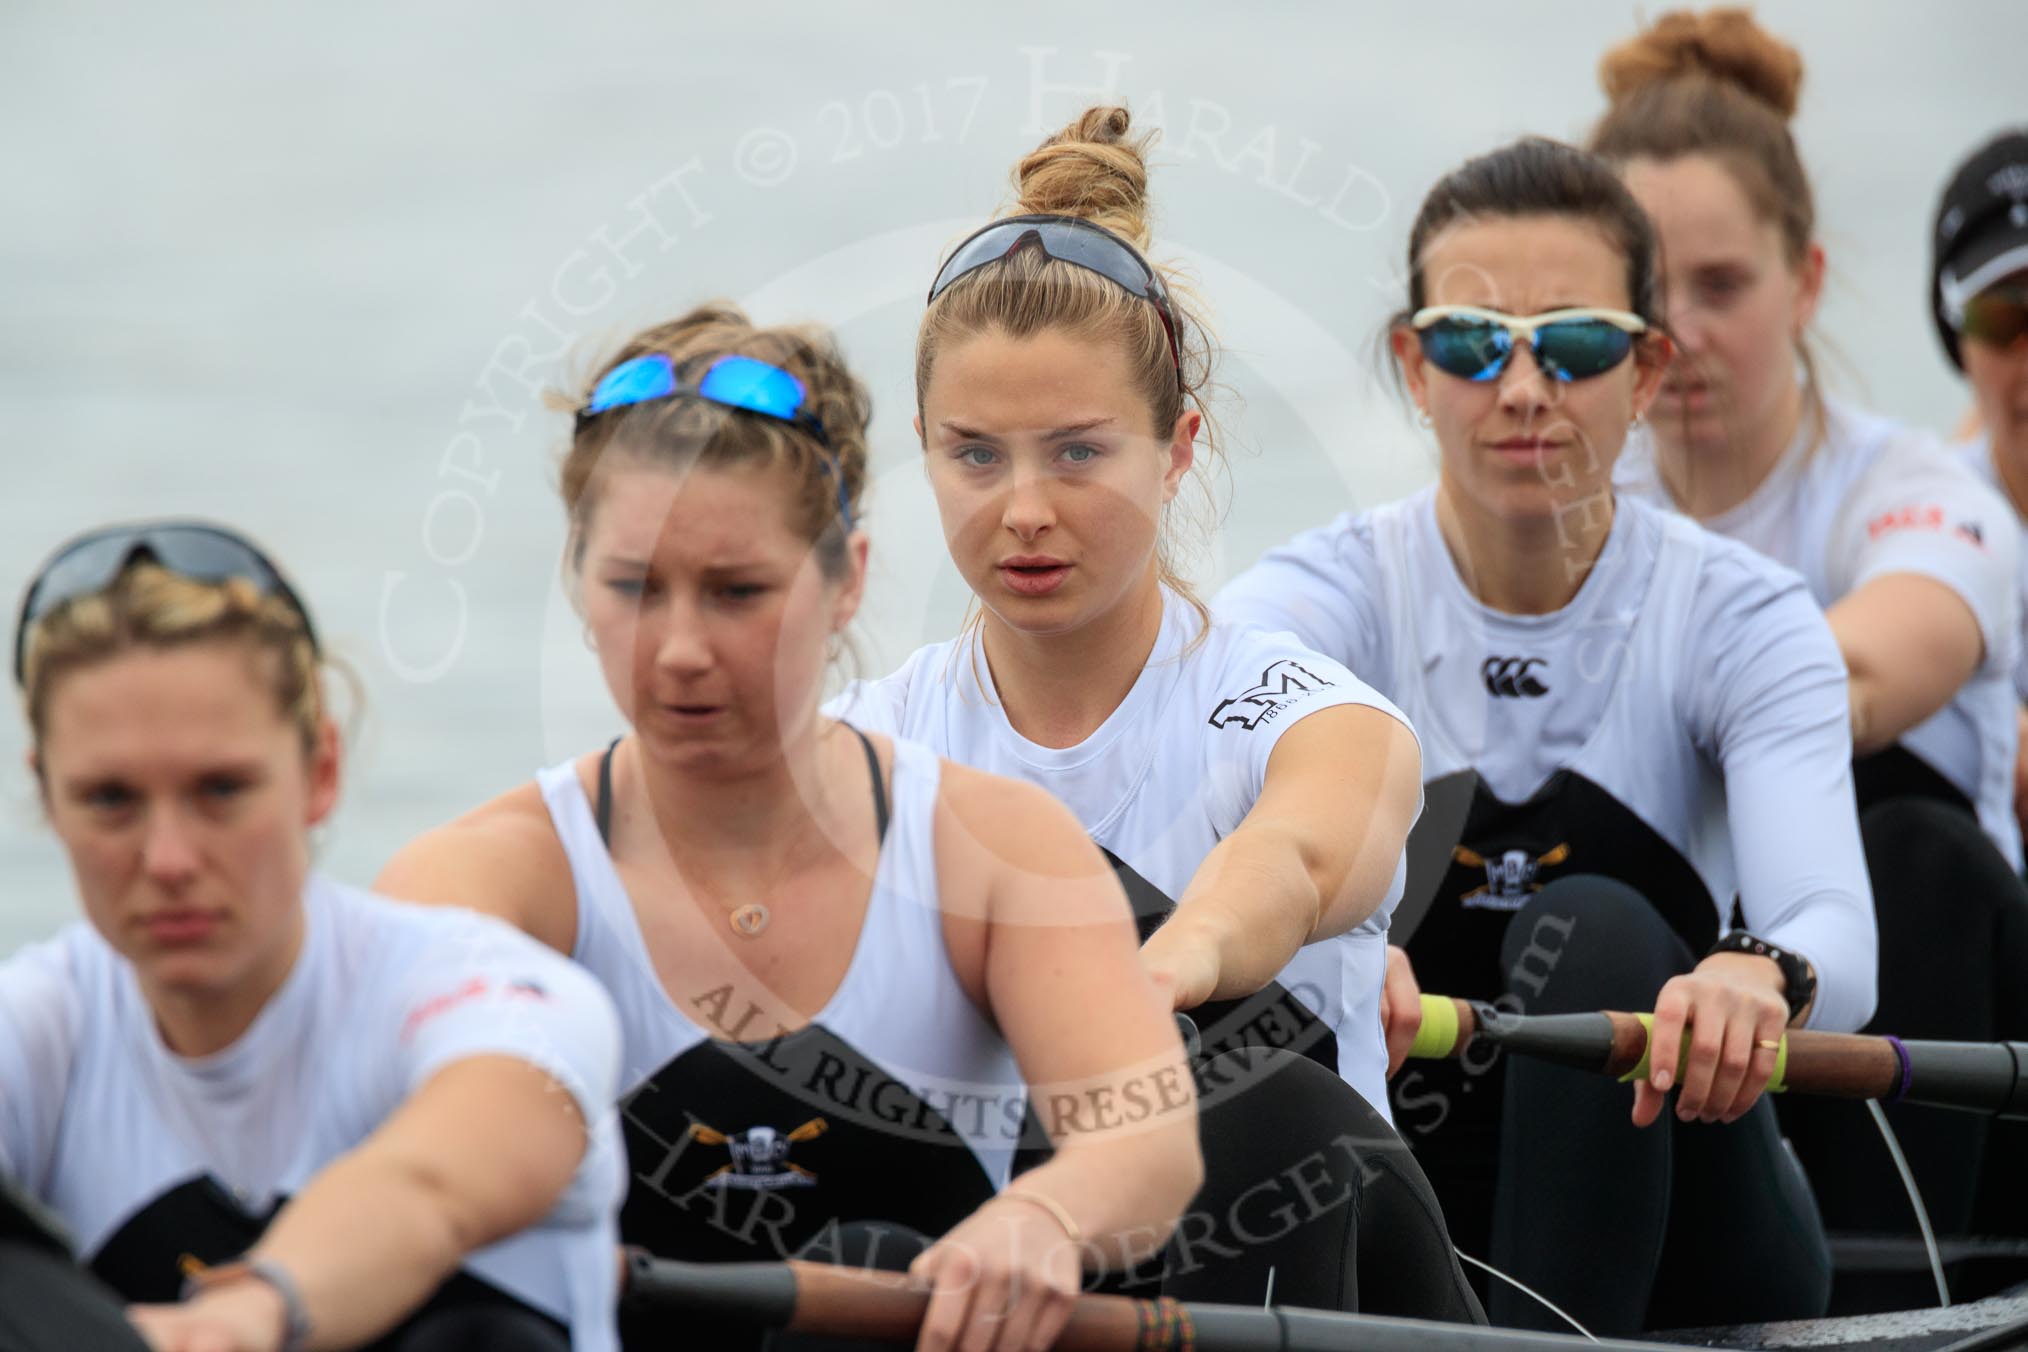 The Women's Boat Race season 2018 - fixture OUWBC vs. Molesey BC: Molesey ready for the race to be started: Stroke Katie Bartlett, 7 Emma McDonald, 6 Molly Harding, 5 Ruth Whyman, 4 Claire McKeown.
River Thames between Putney Bridge and Mortlake,
London SW15,

United Kingdom,
on 04 March 2018 at 13:44, image #48